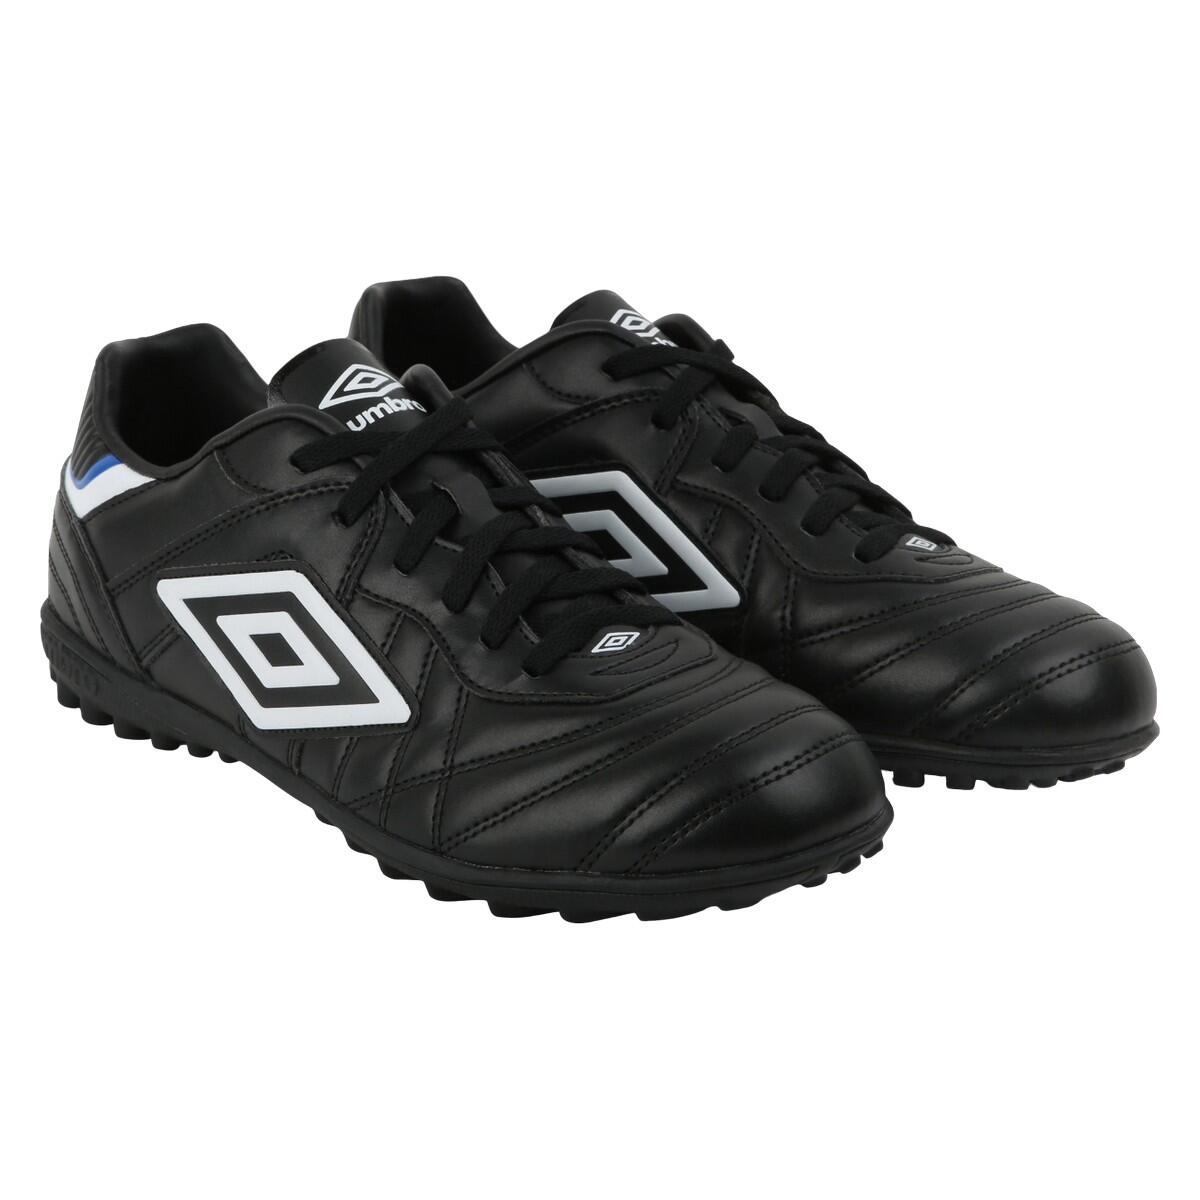 Mens Speciali Eternal Club Tf Leather Football Boots (Black/White/Royal Blue) 1/4